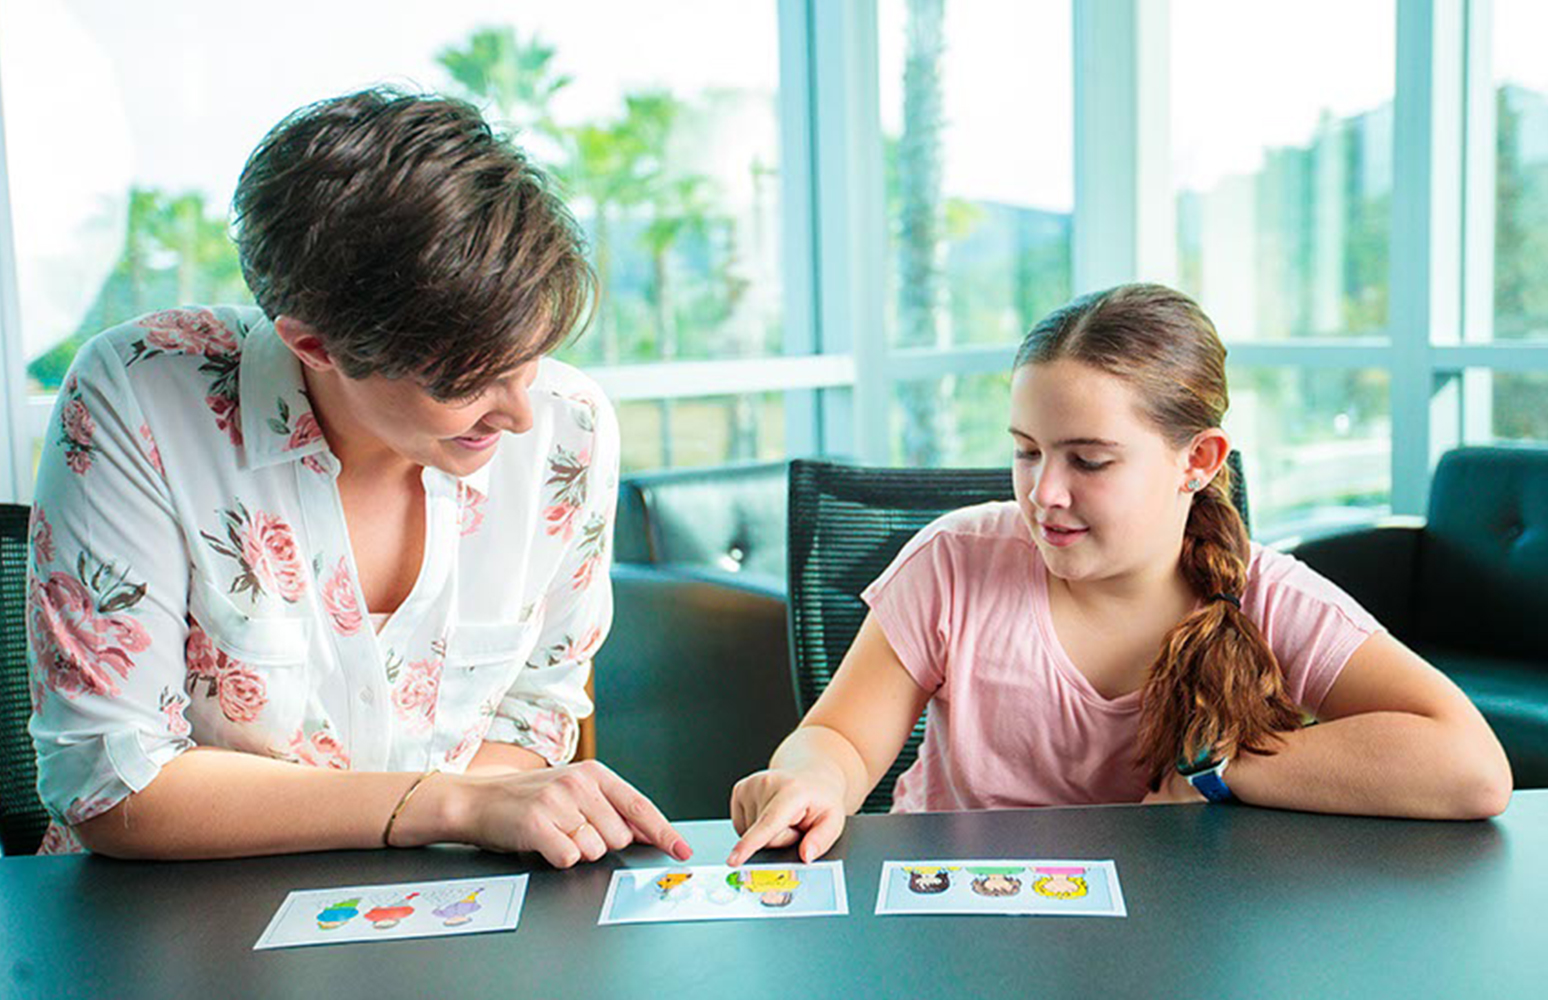 Female speech therapist seated with young girl at table pointing at flashcards